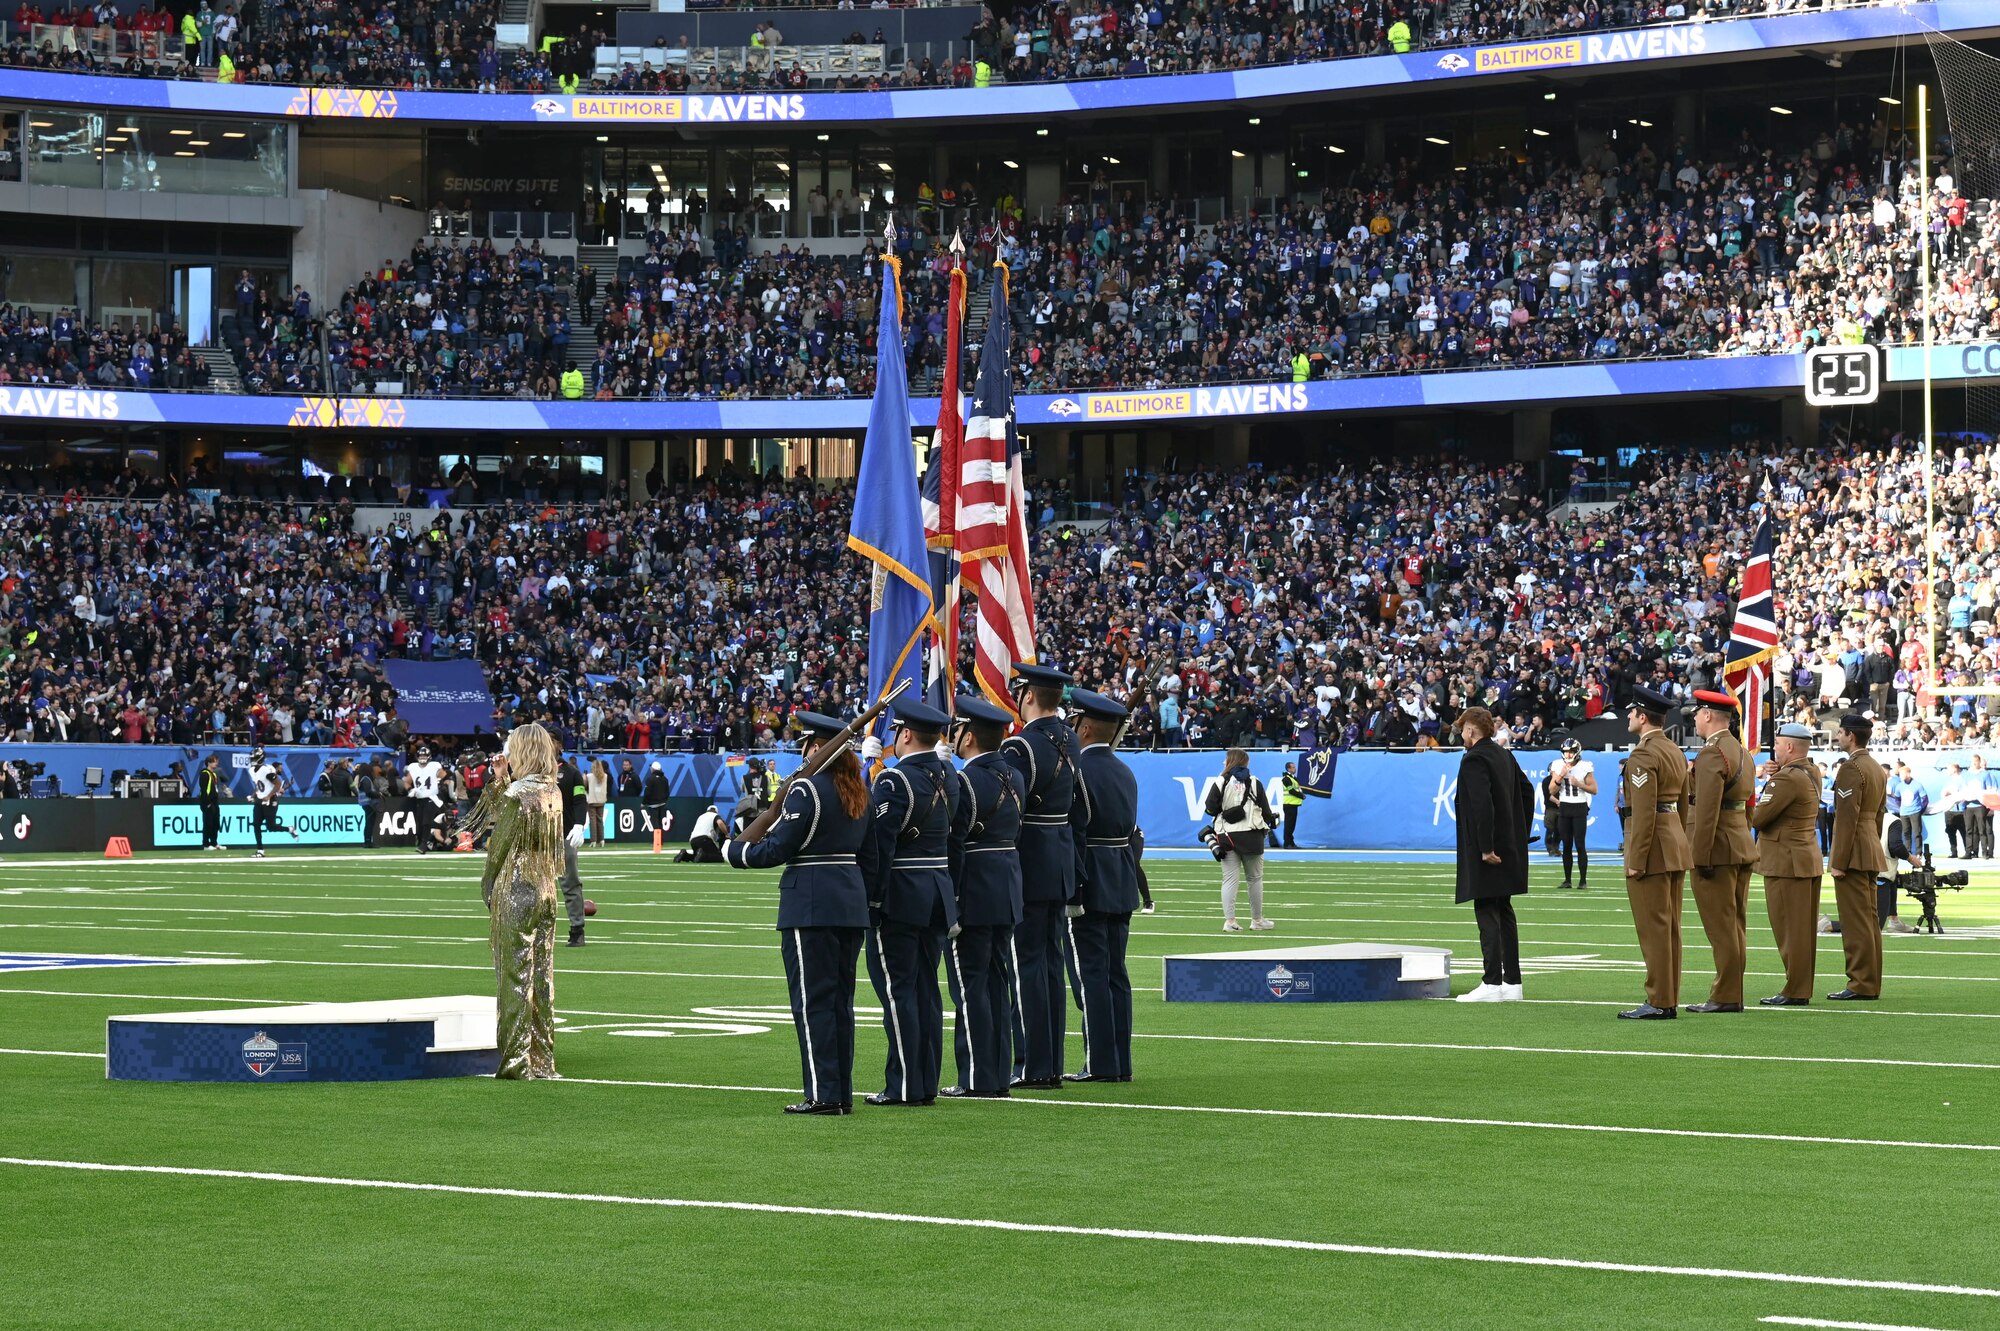 The pre-game ceremony featured more than 40 Airmen unfurling the flag along with the RAF Lakenheath Honor Guard.